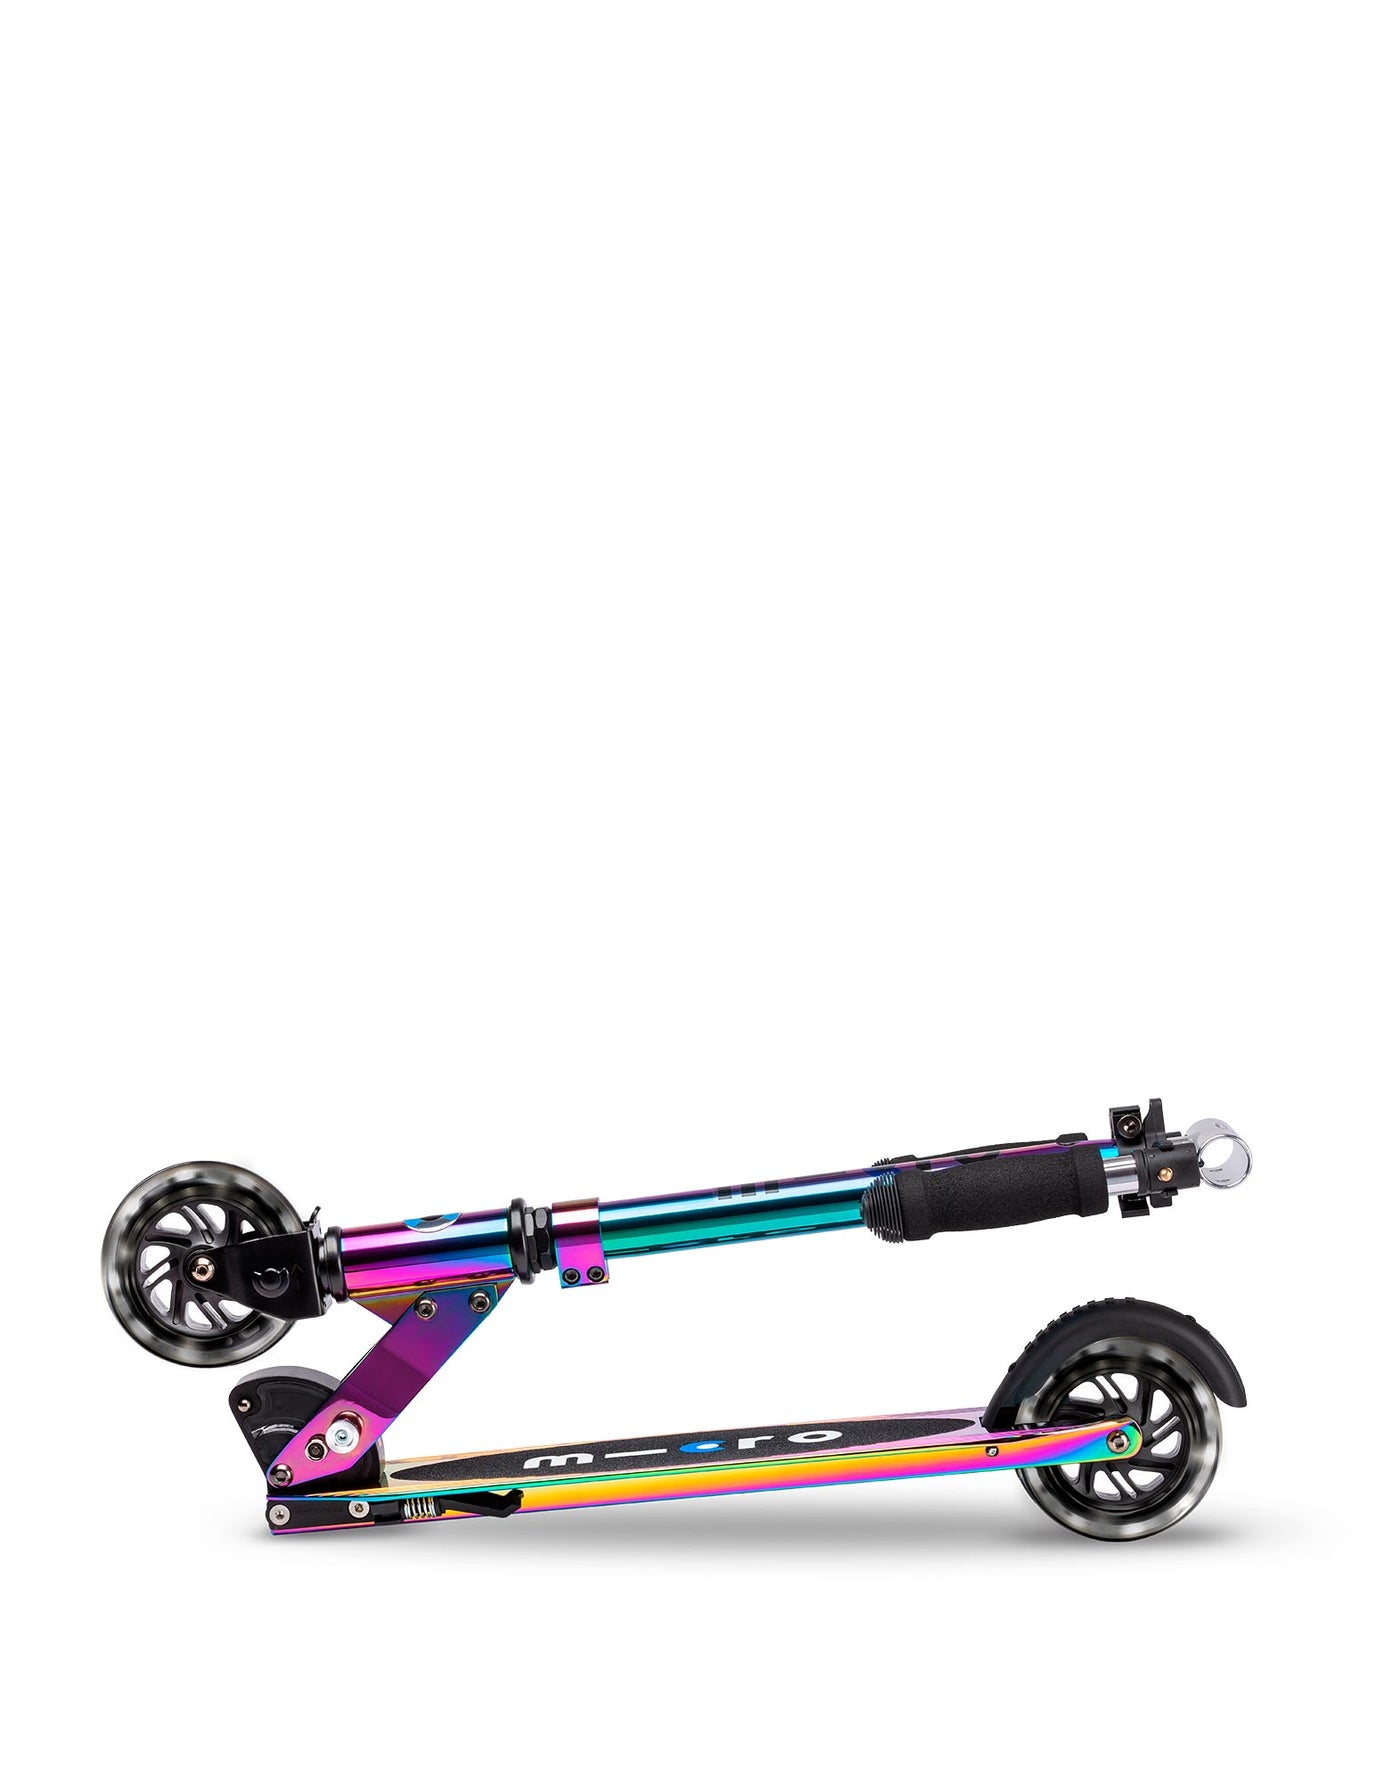 neochrome sprite kids 2 wheel scooter with led wheels folded